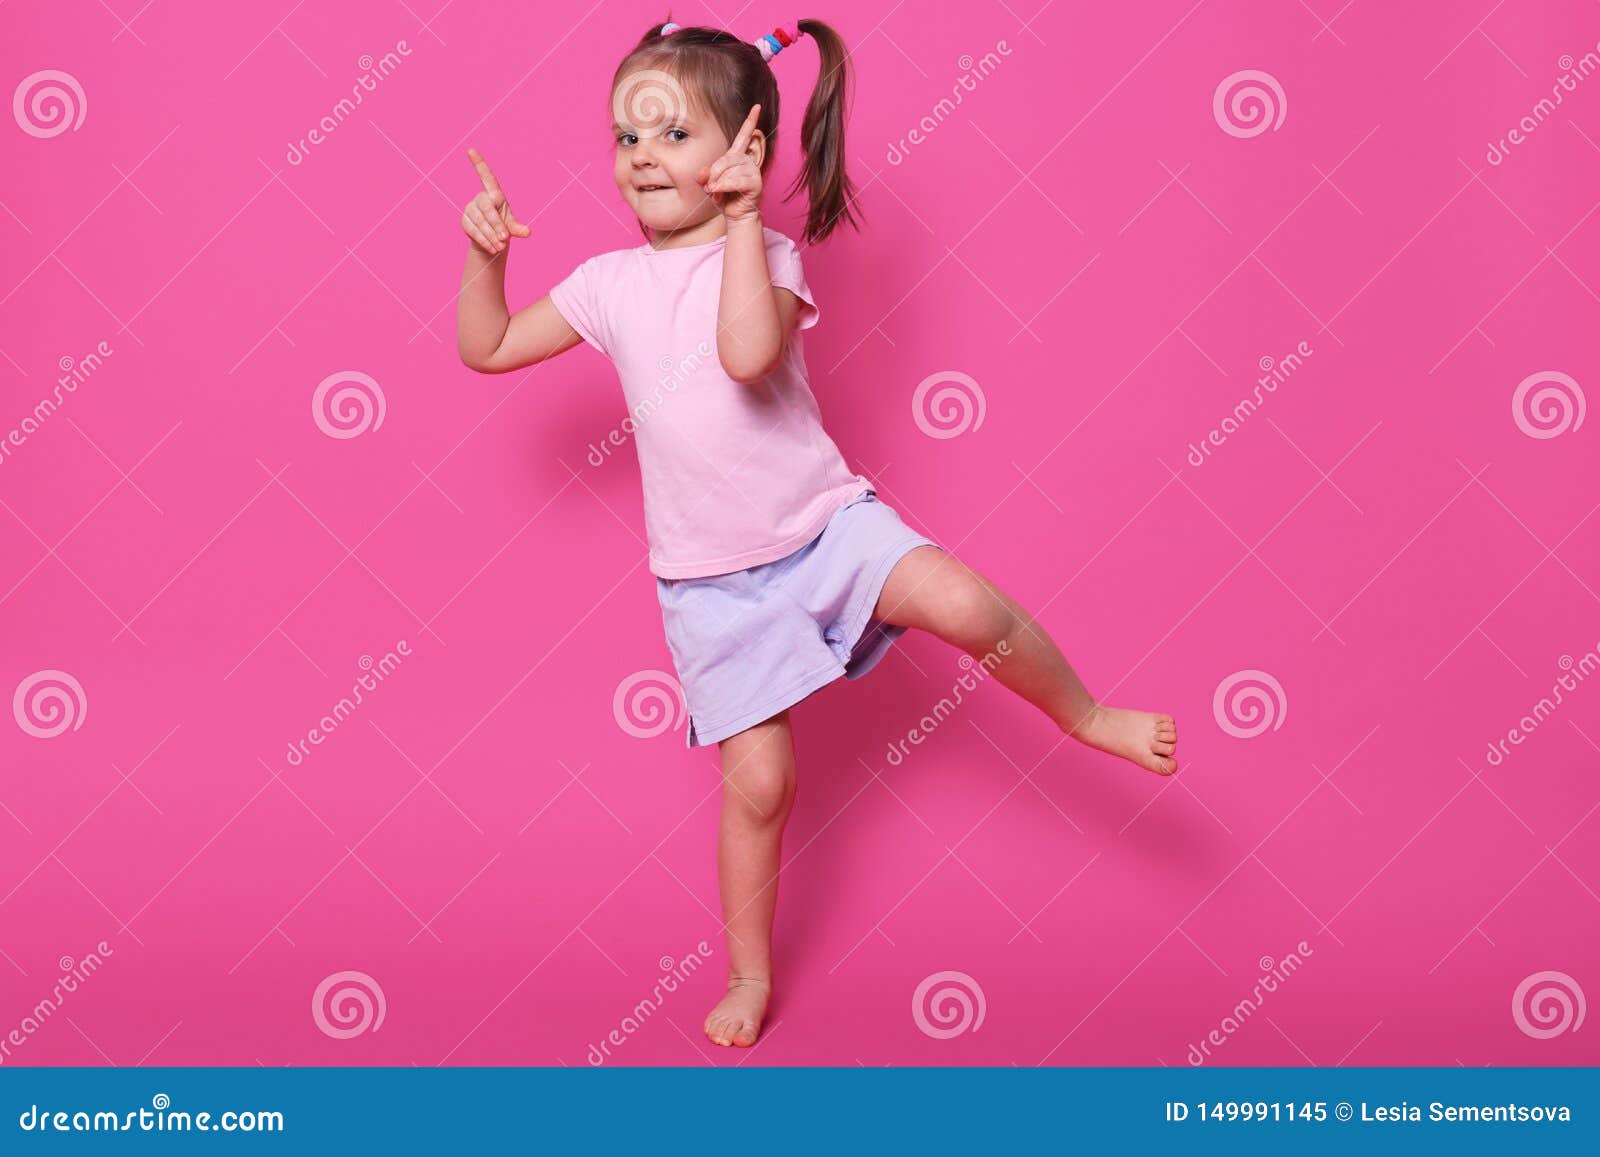 close up portrait of toddler child baby girl standing in pink casual t shirt and purple short, pointing both fore fingers up and